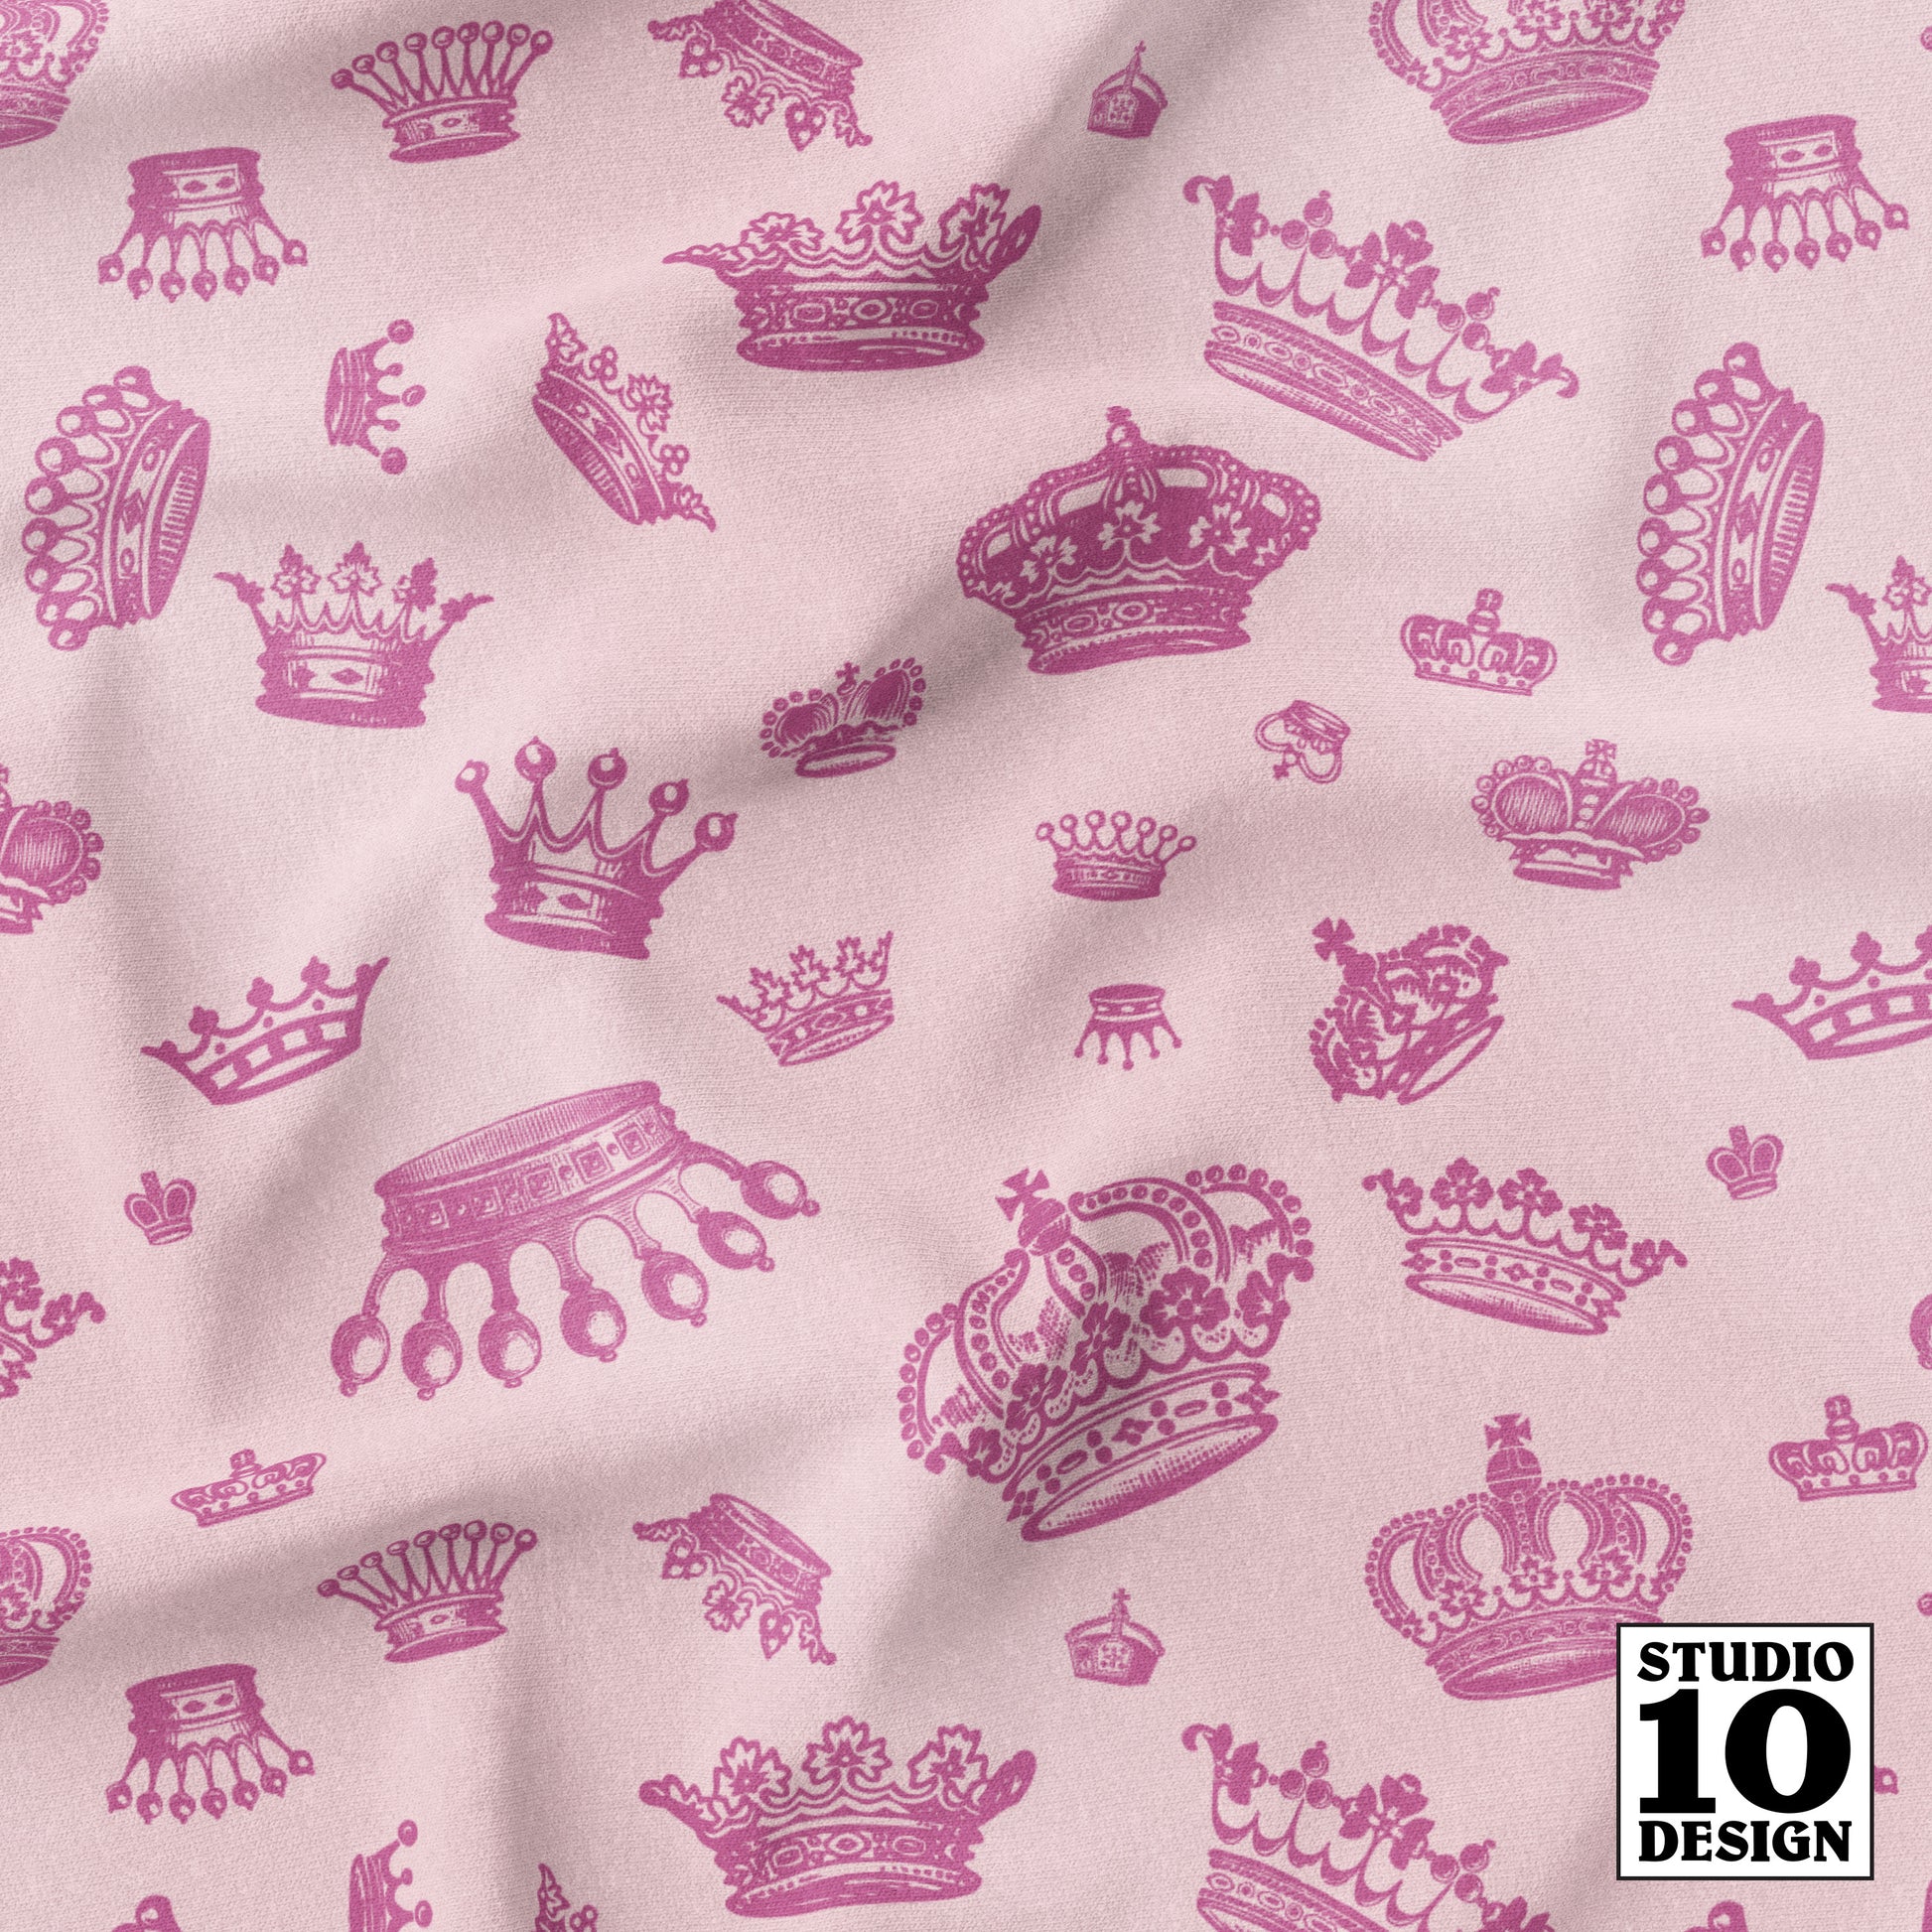 Royal Crowns Peony+Cotton Candy Printed Fabric by Studio Ten Design